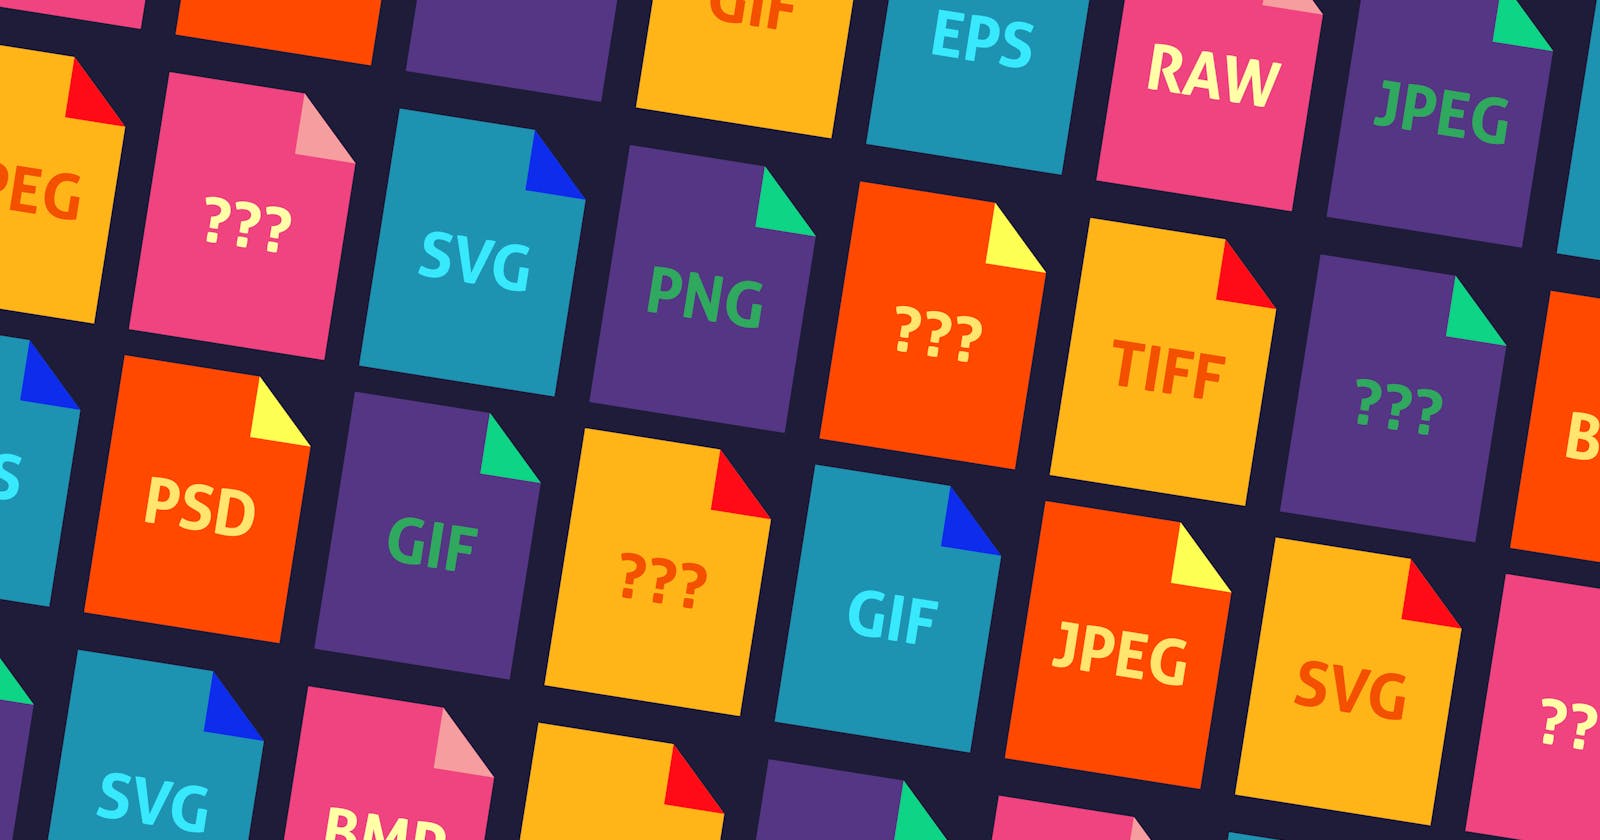 Image formats for better web performance